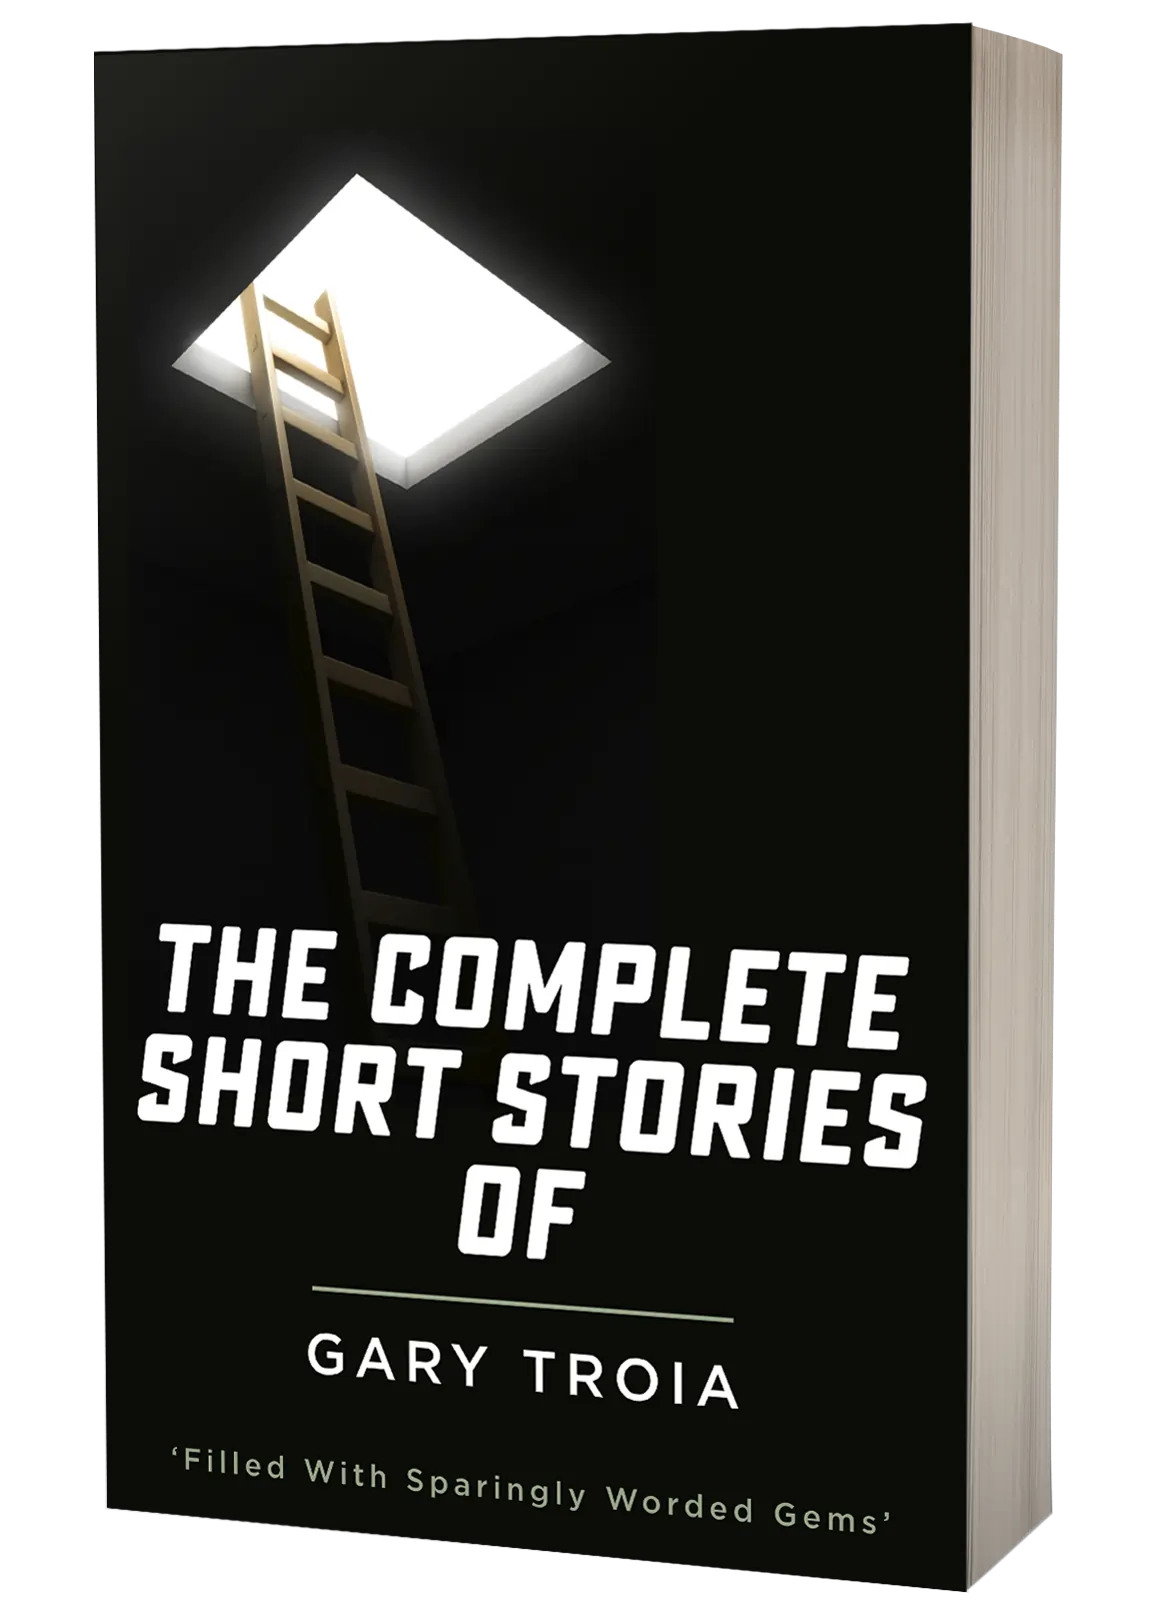 The Complete Short Stories of Gary Troia